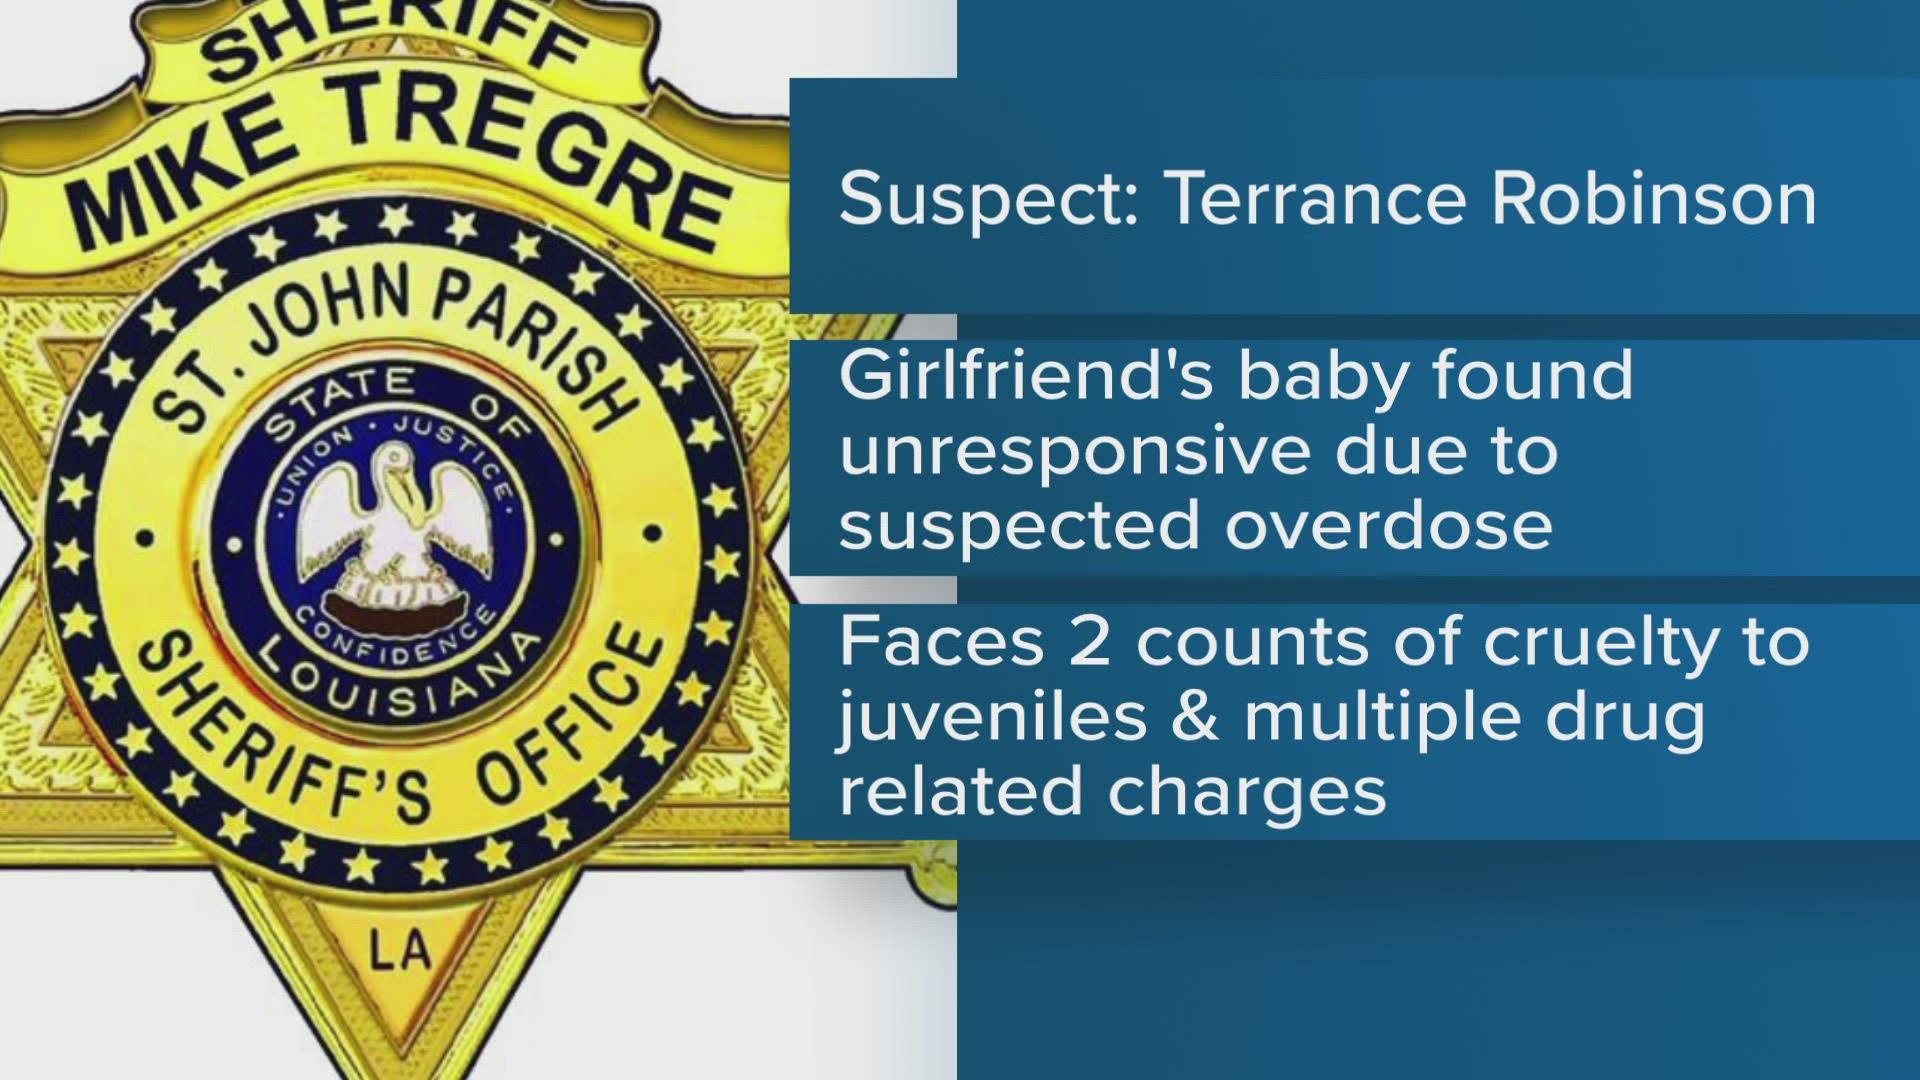 Laplace man arrested in suspected drug overdose of a 1-year-old child according to the St. John the Baptist Parish Sheriff's Office.